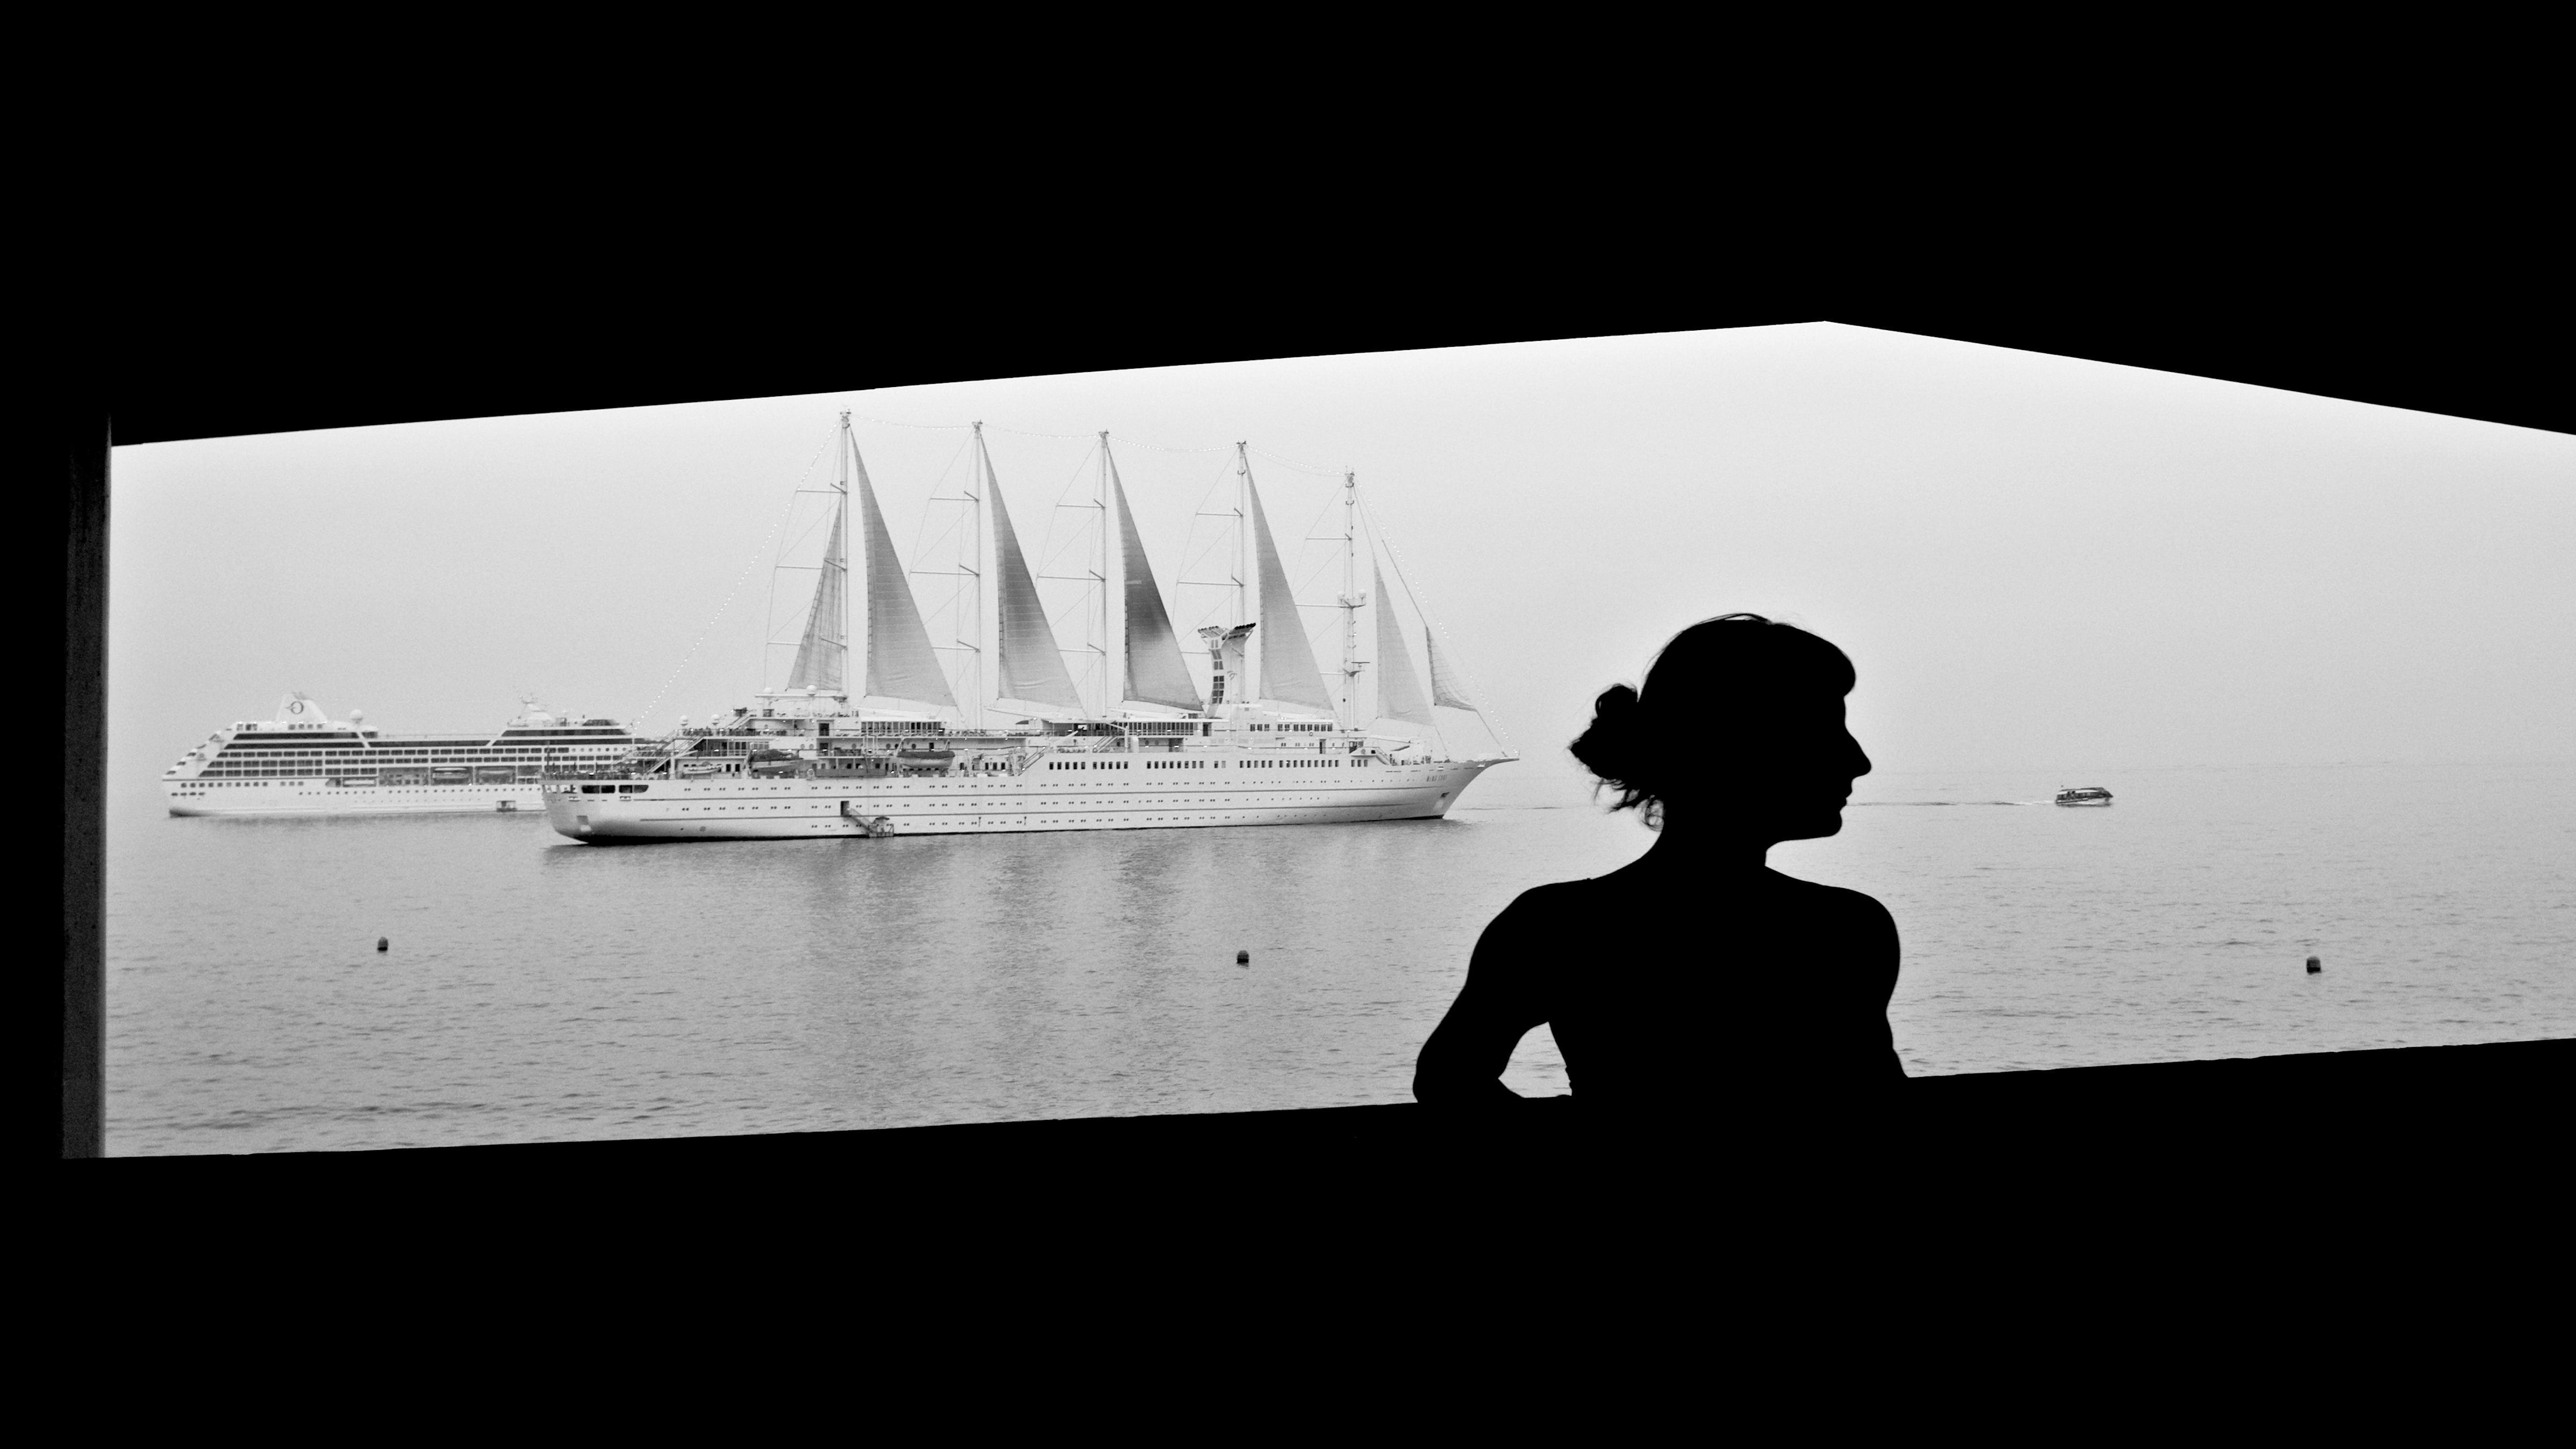 A woman posing in front of a cruise ship